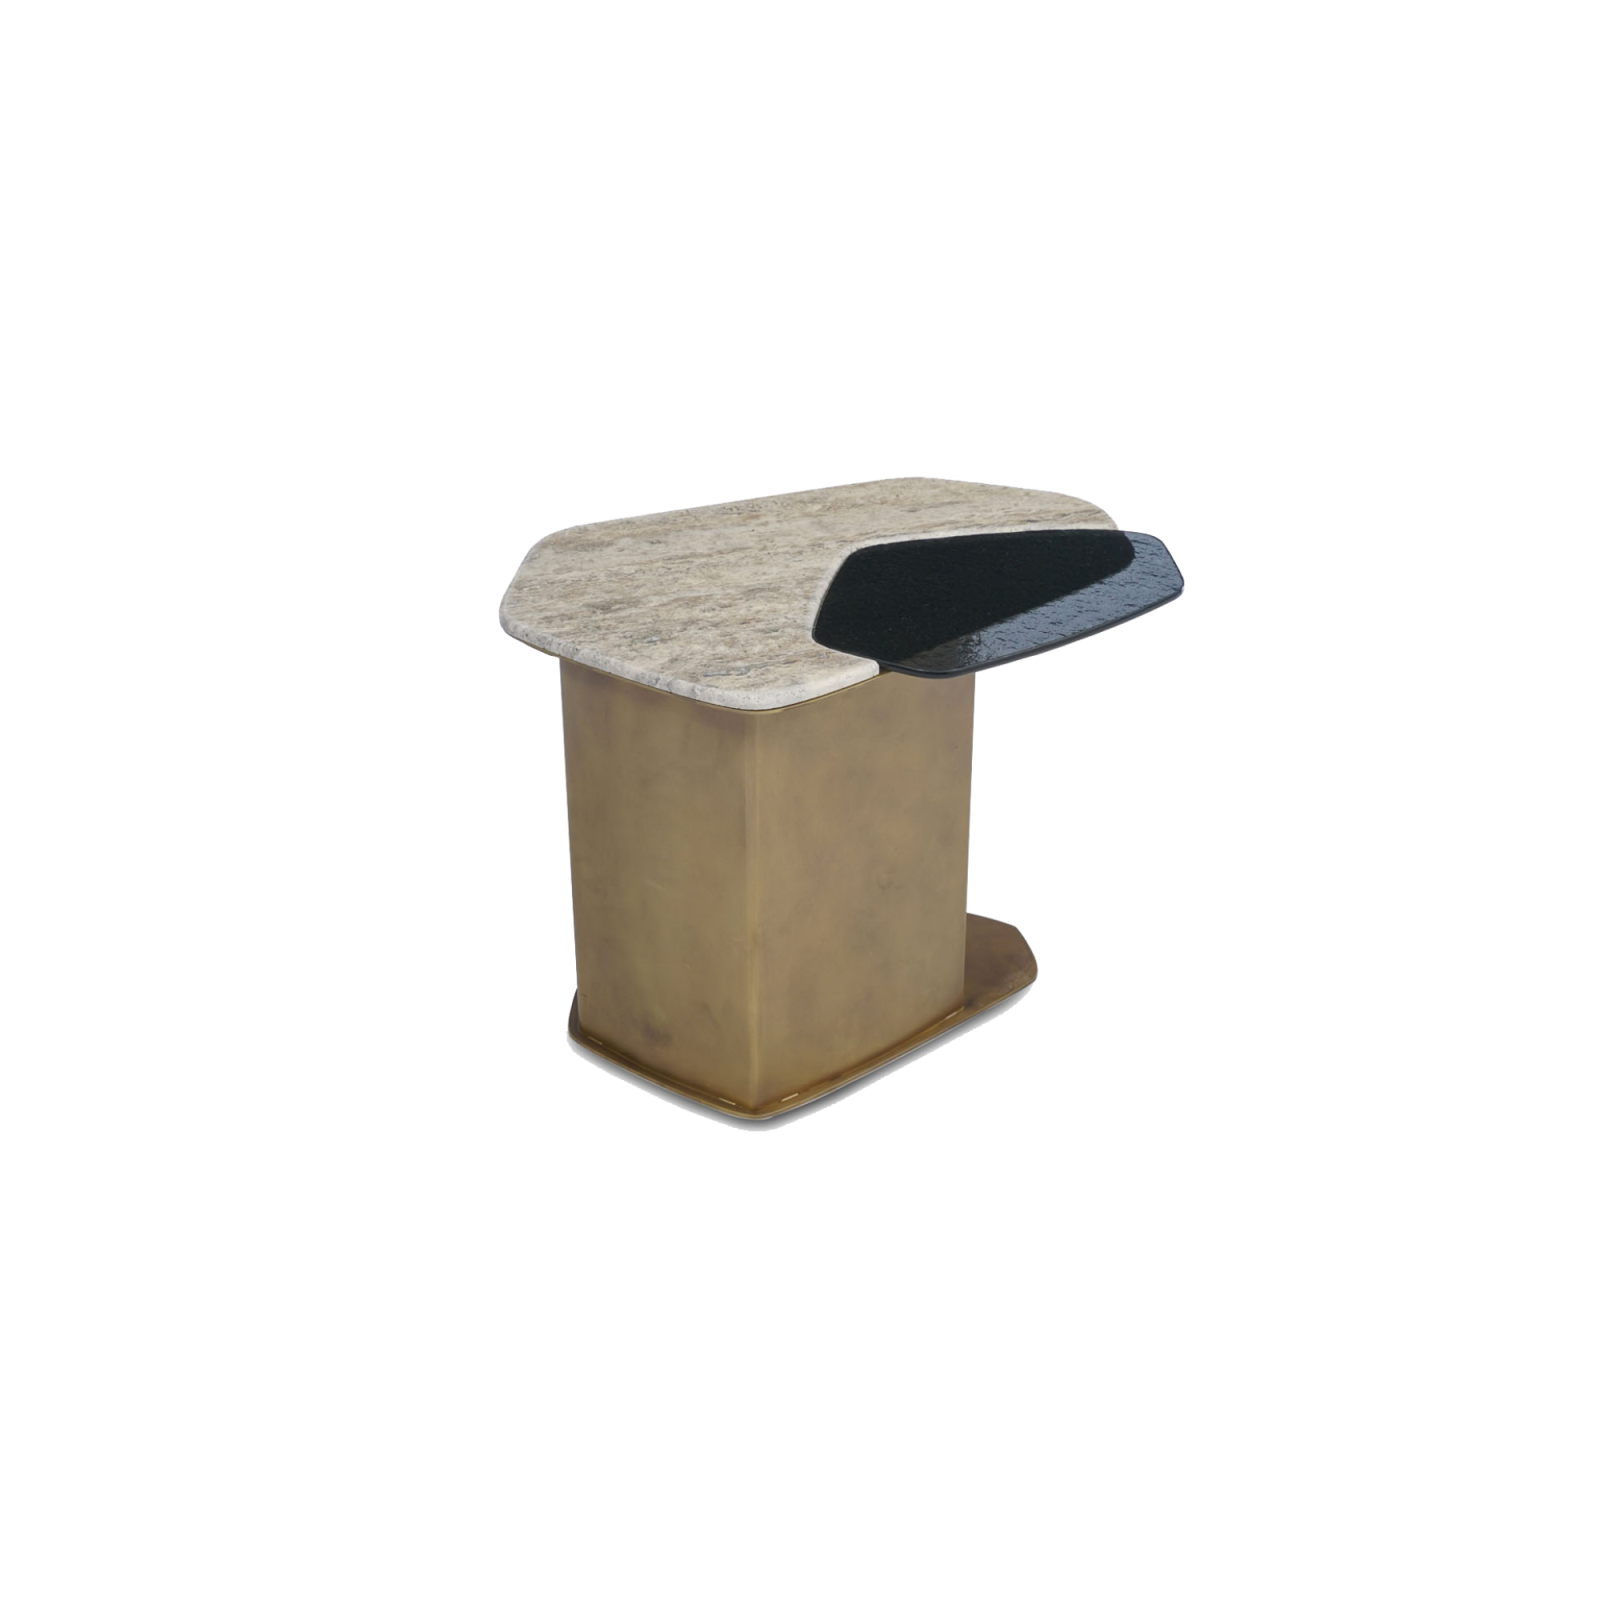 Stratos side table, which consists of the harmony of travertine, fusion glass, and metal standing in front of a white background.